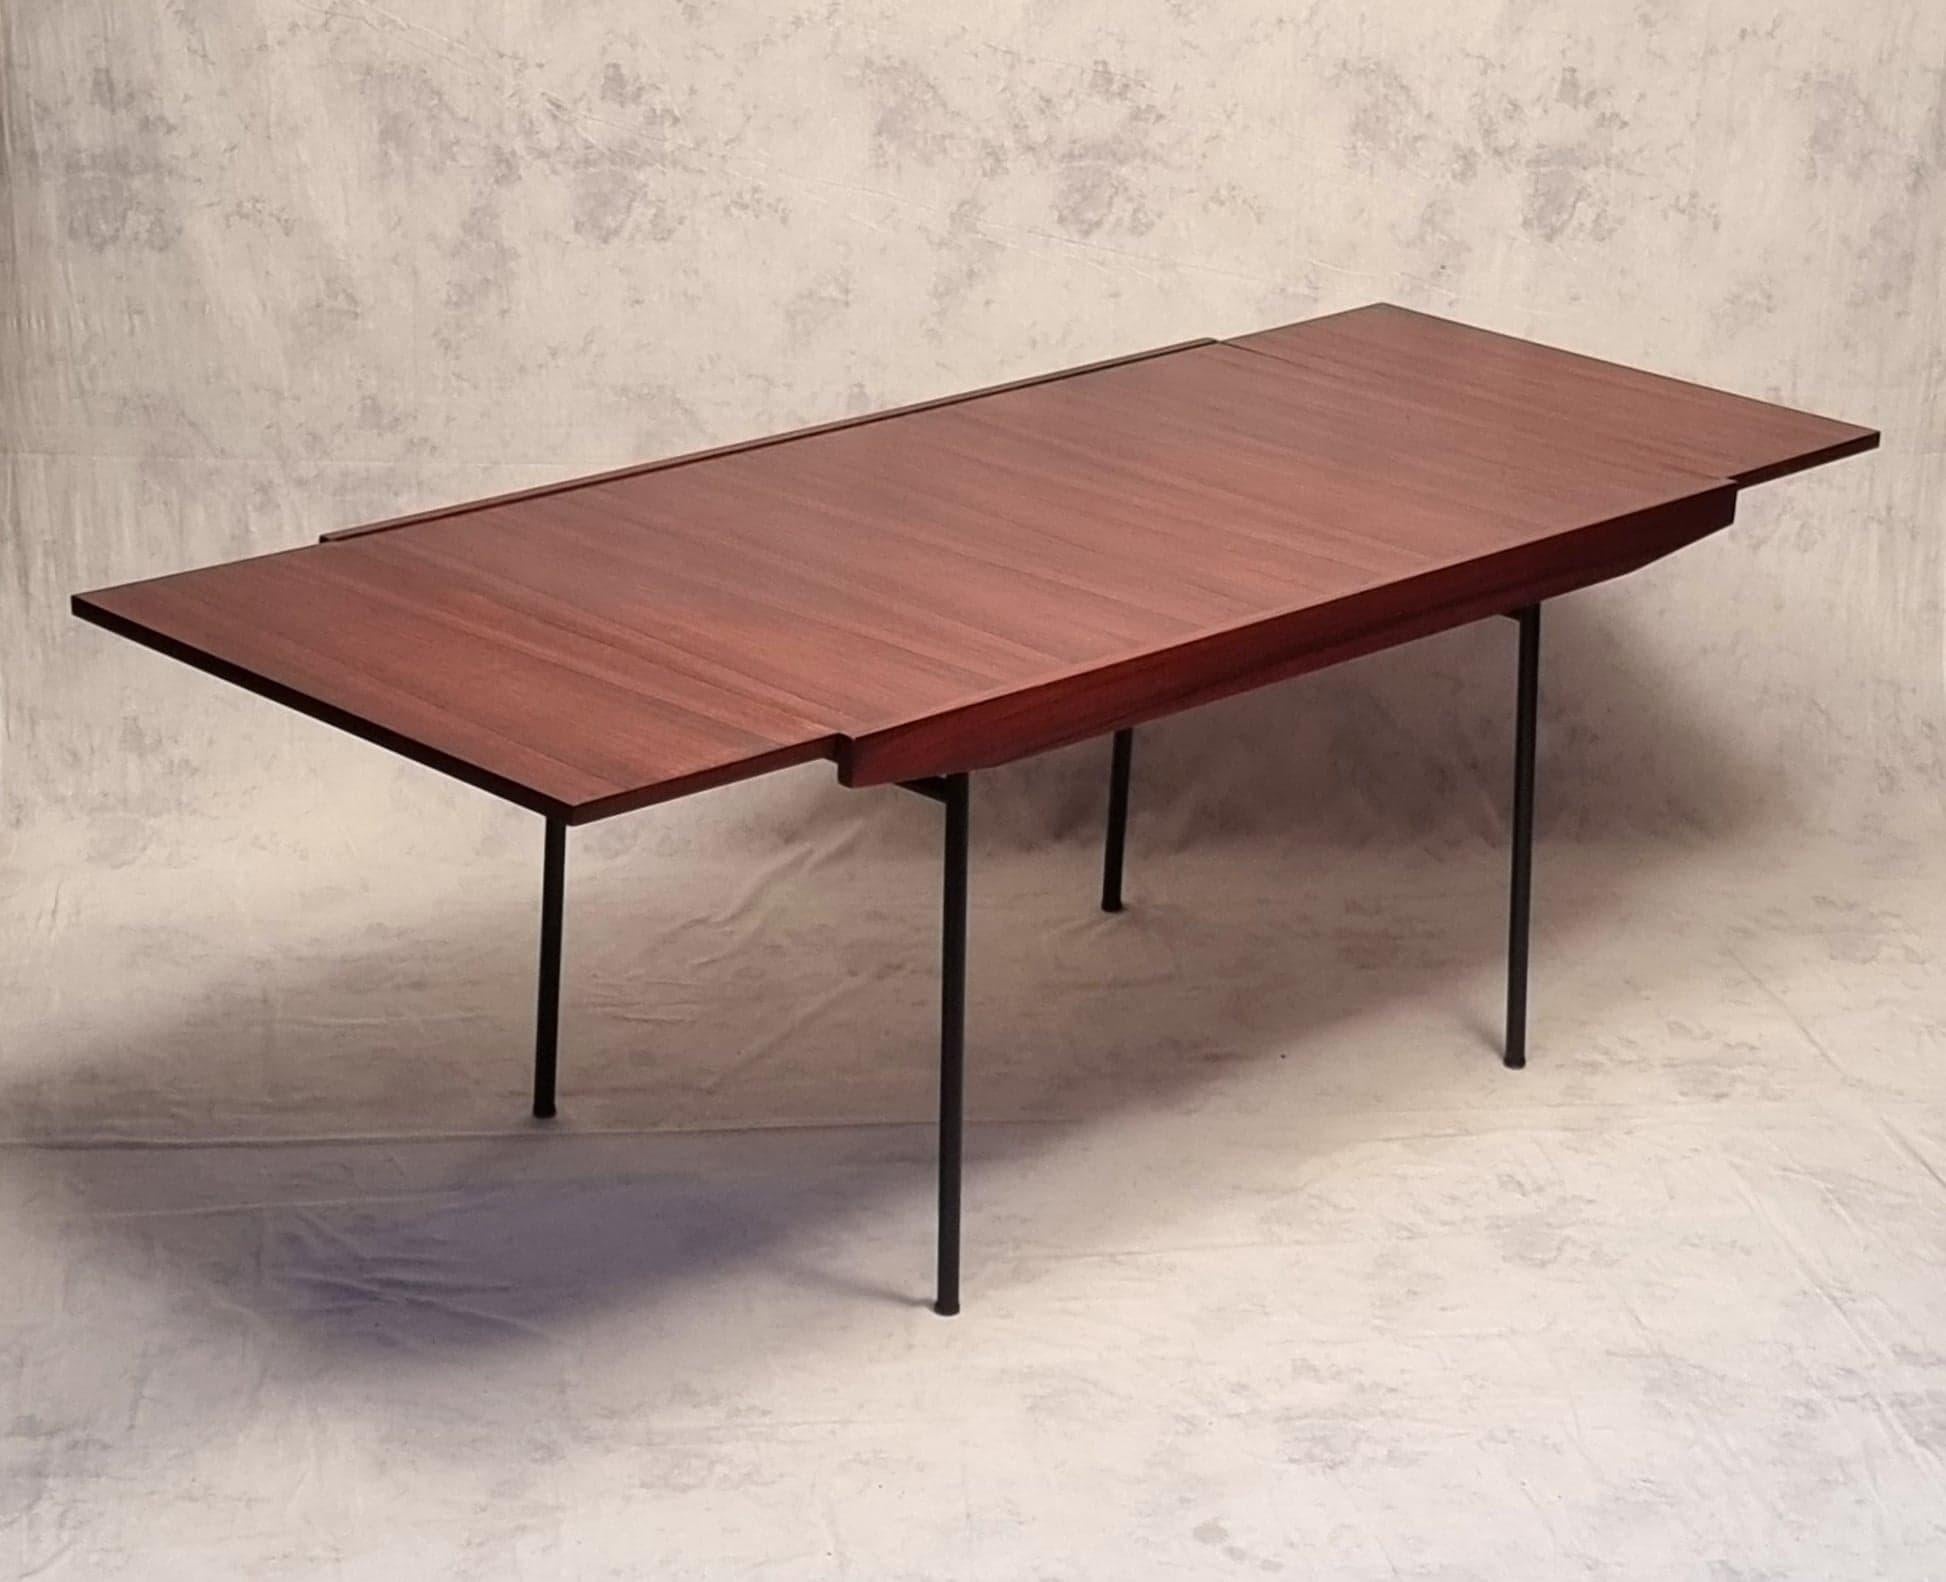 Mid-20th Century Model 324 Table by Alain Richard, Meubles TV Edition, Rosewood, Ca 1953